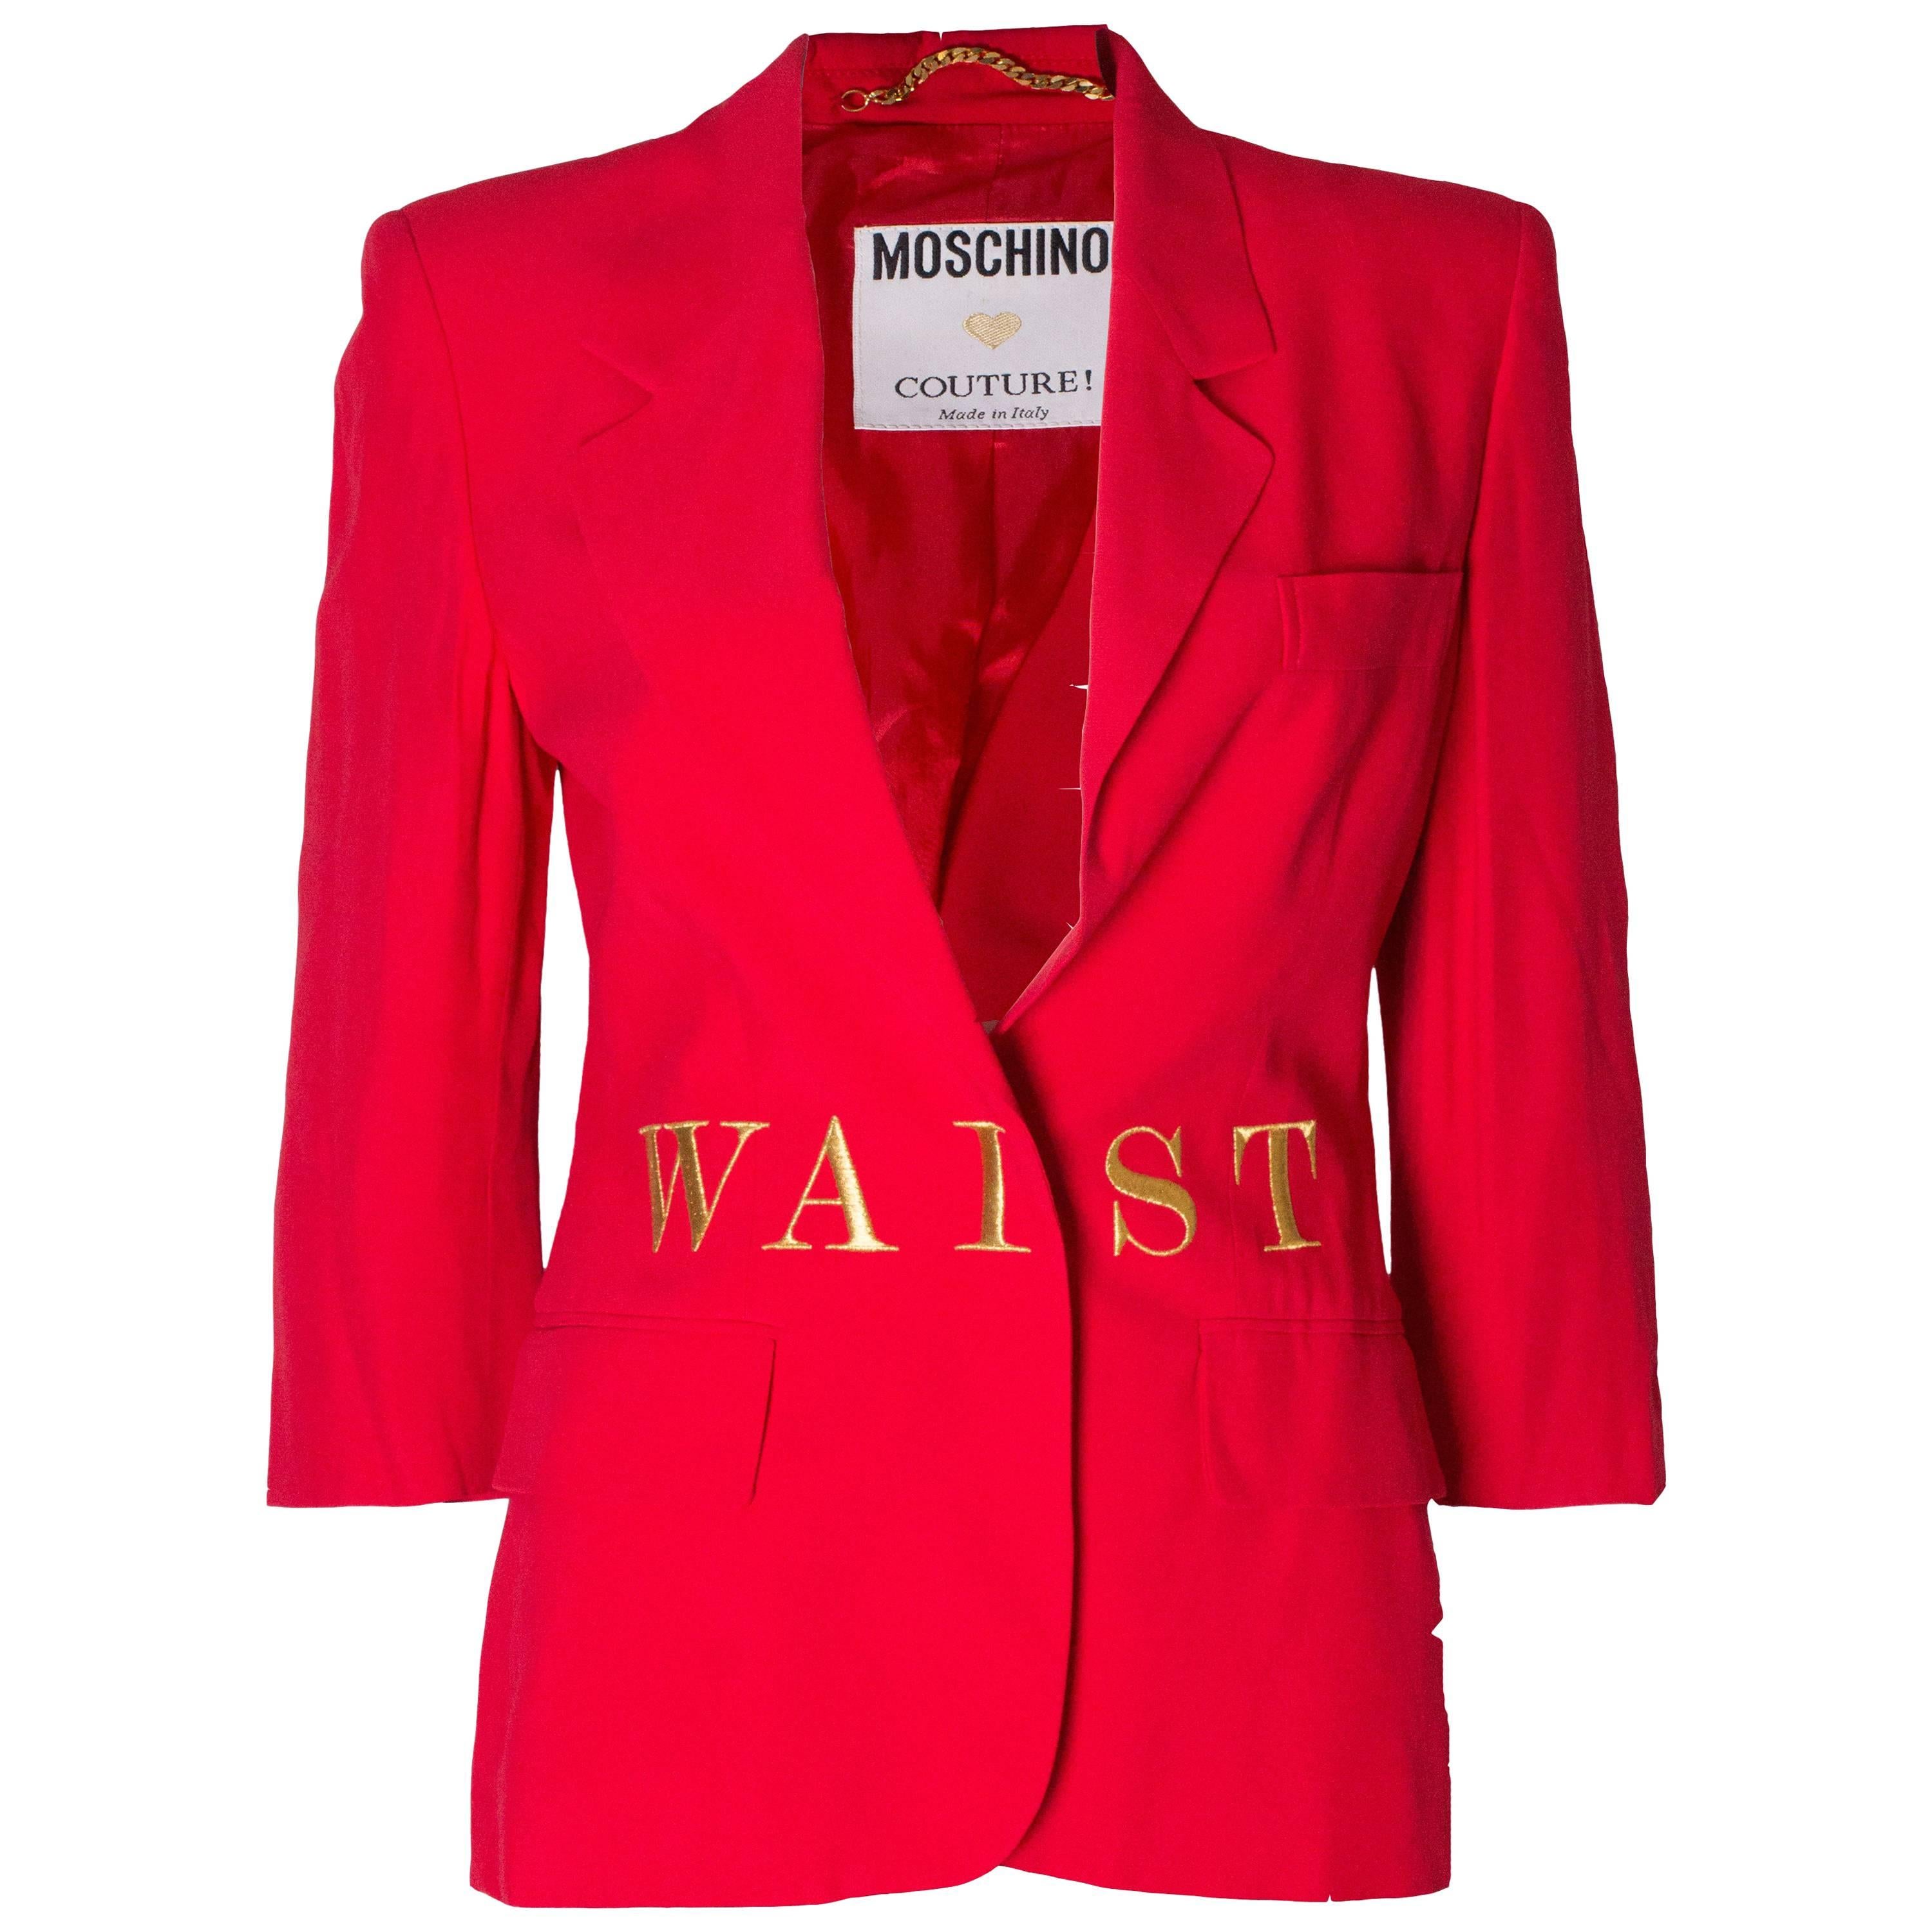 Vintage Moschino Couture Jacket 